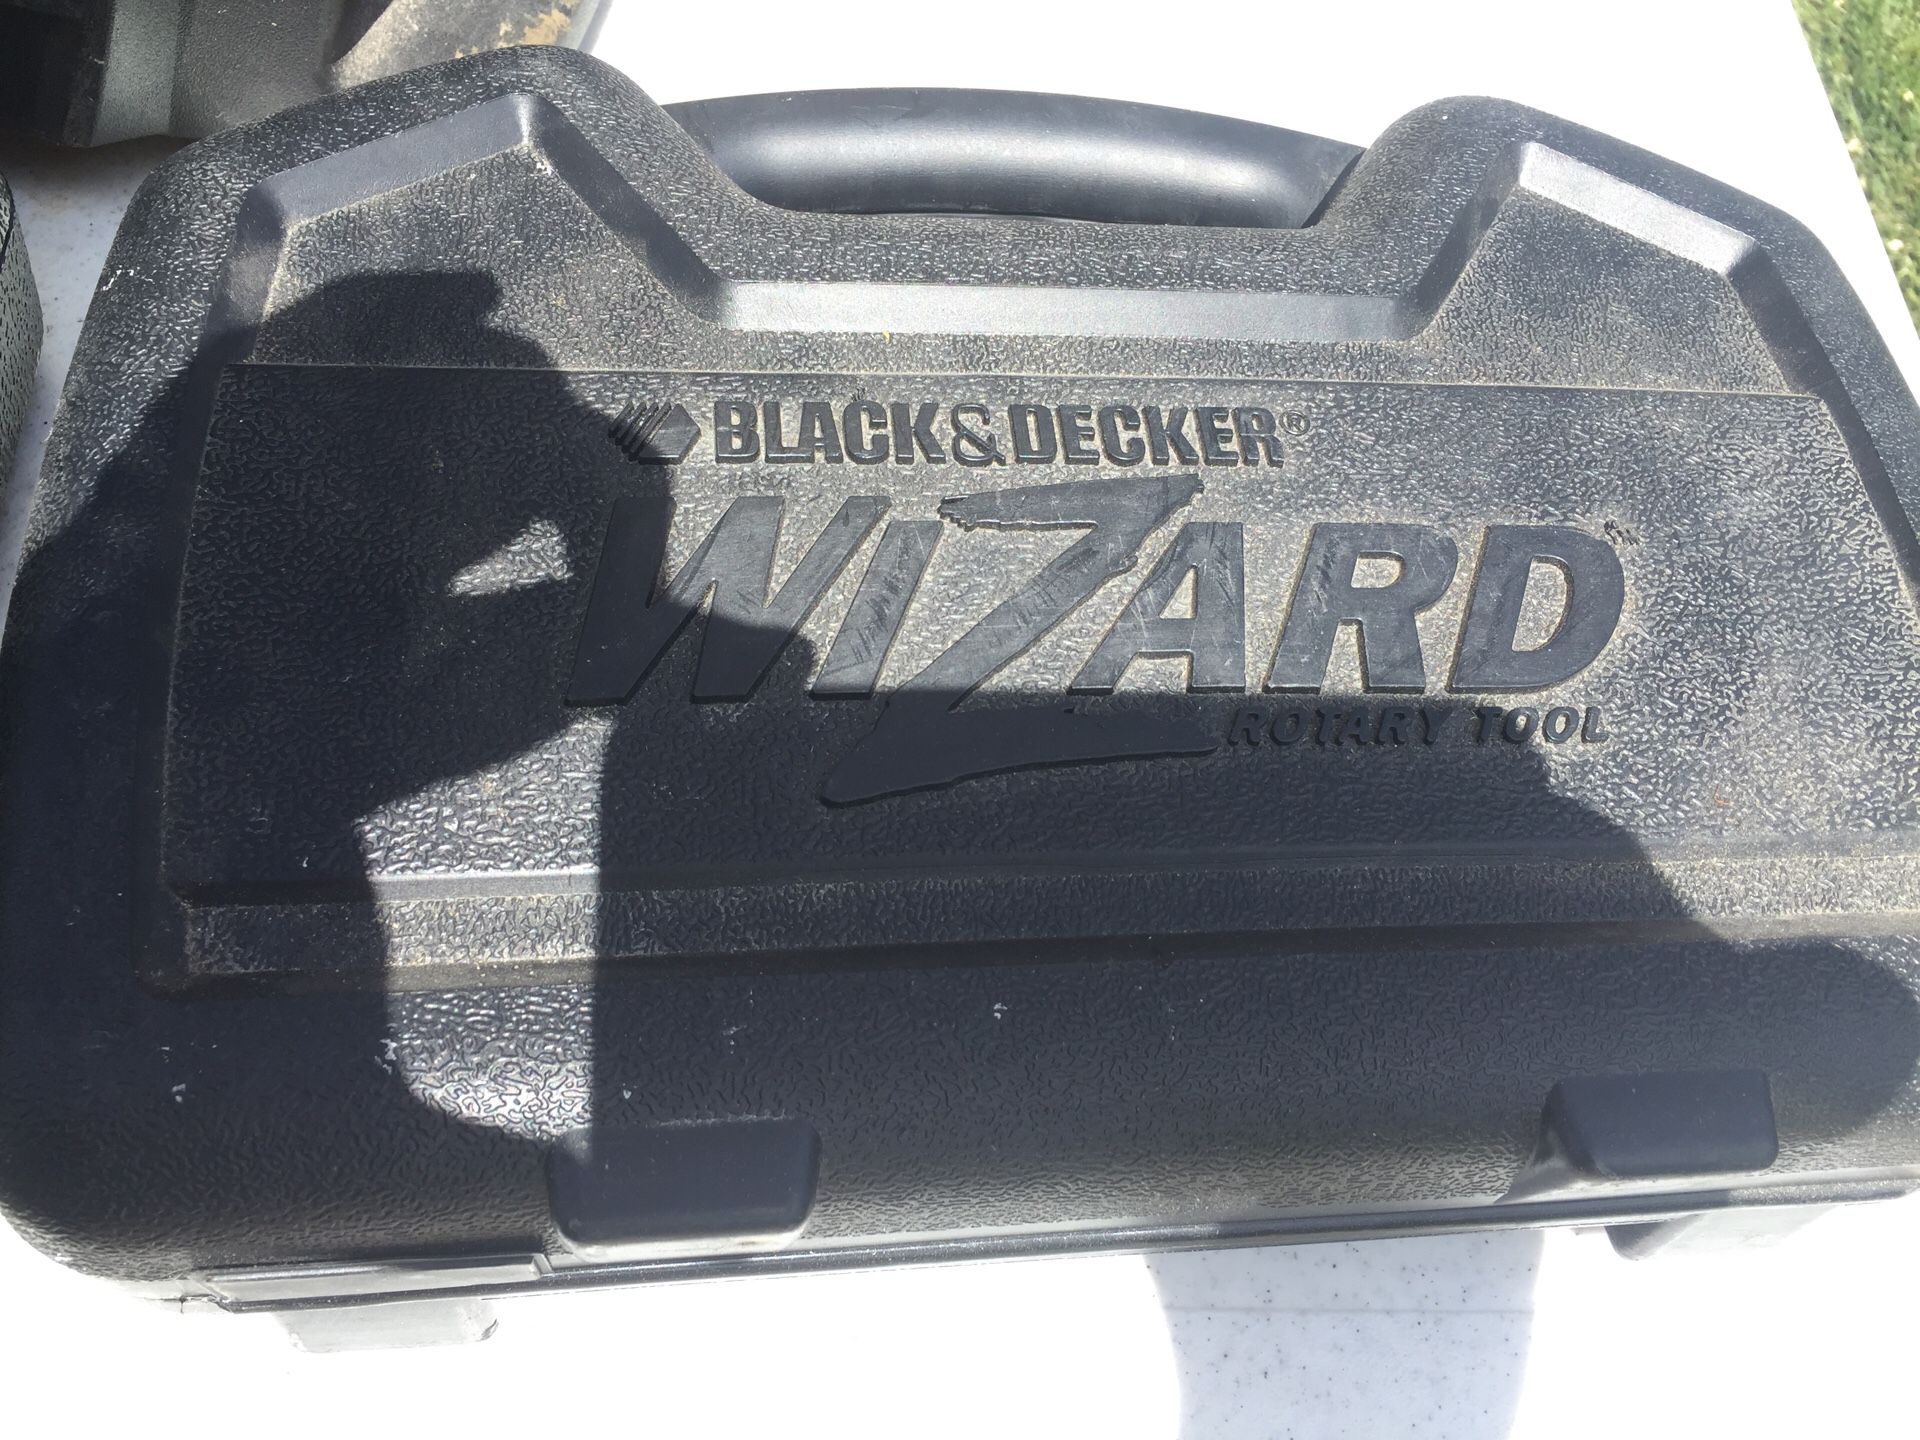 Wizard Rotary Tool - Black and Decker